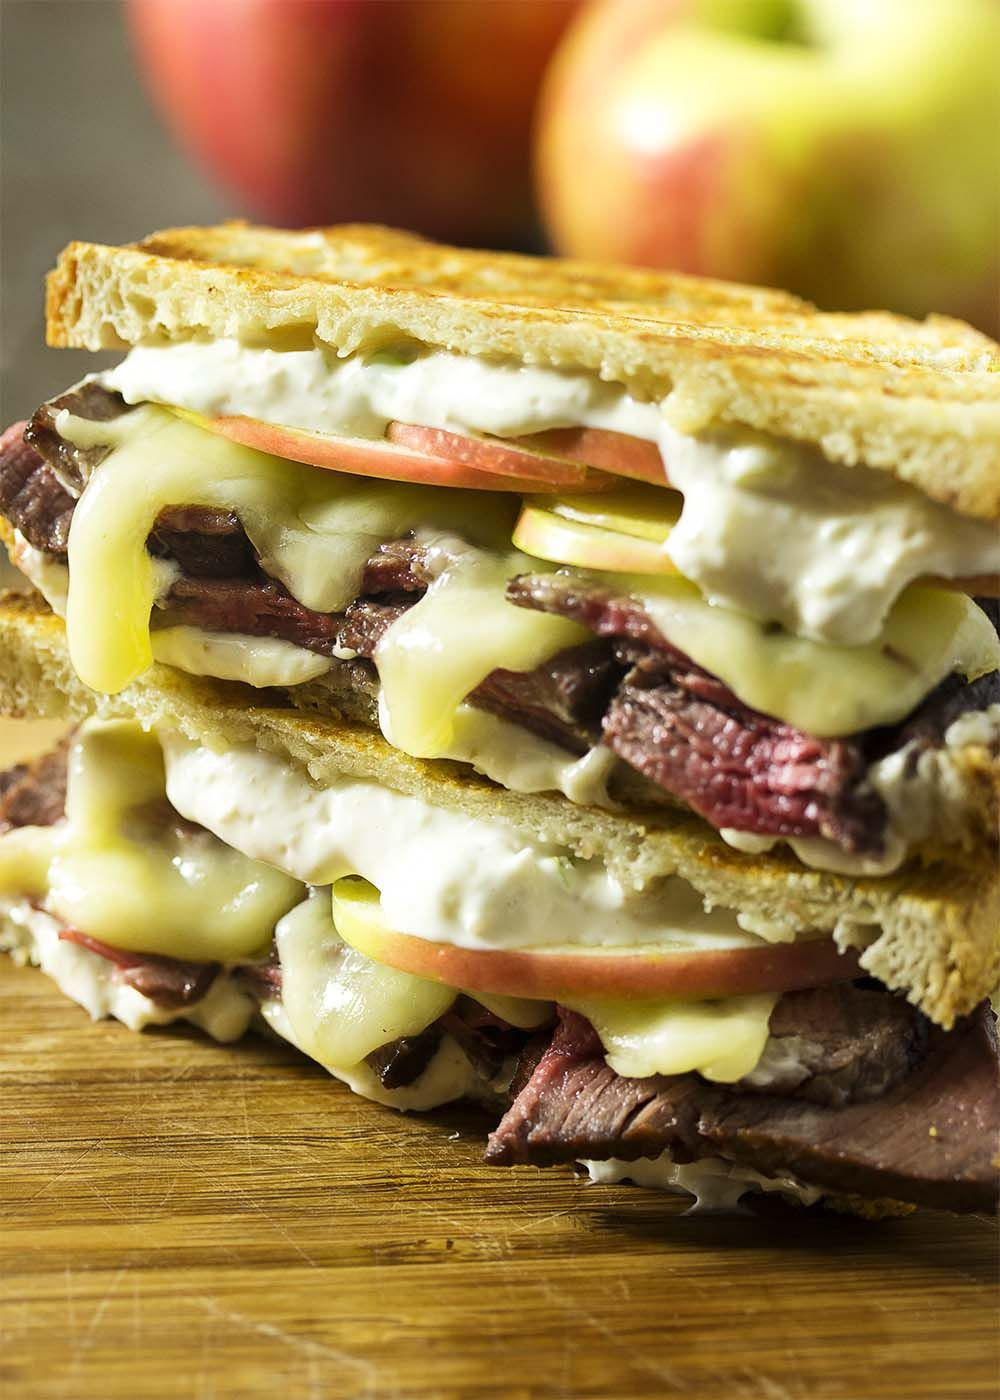 Roast Beef Panini Recipes
 Cheddar Apple and Roast Beef Panini Recipe